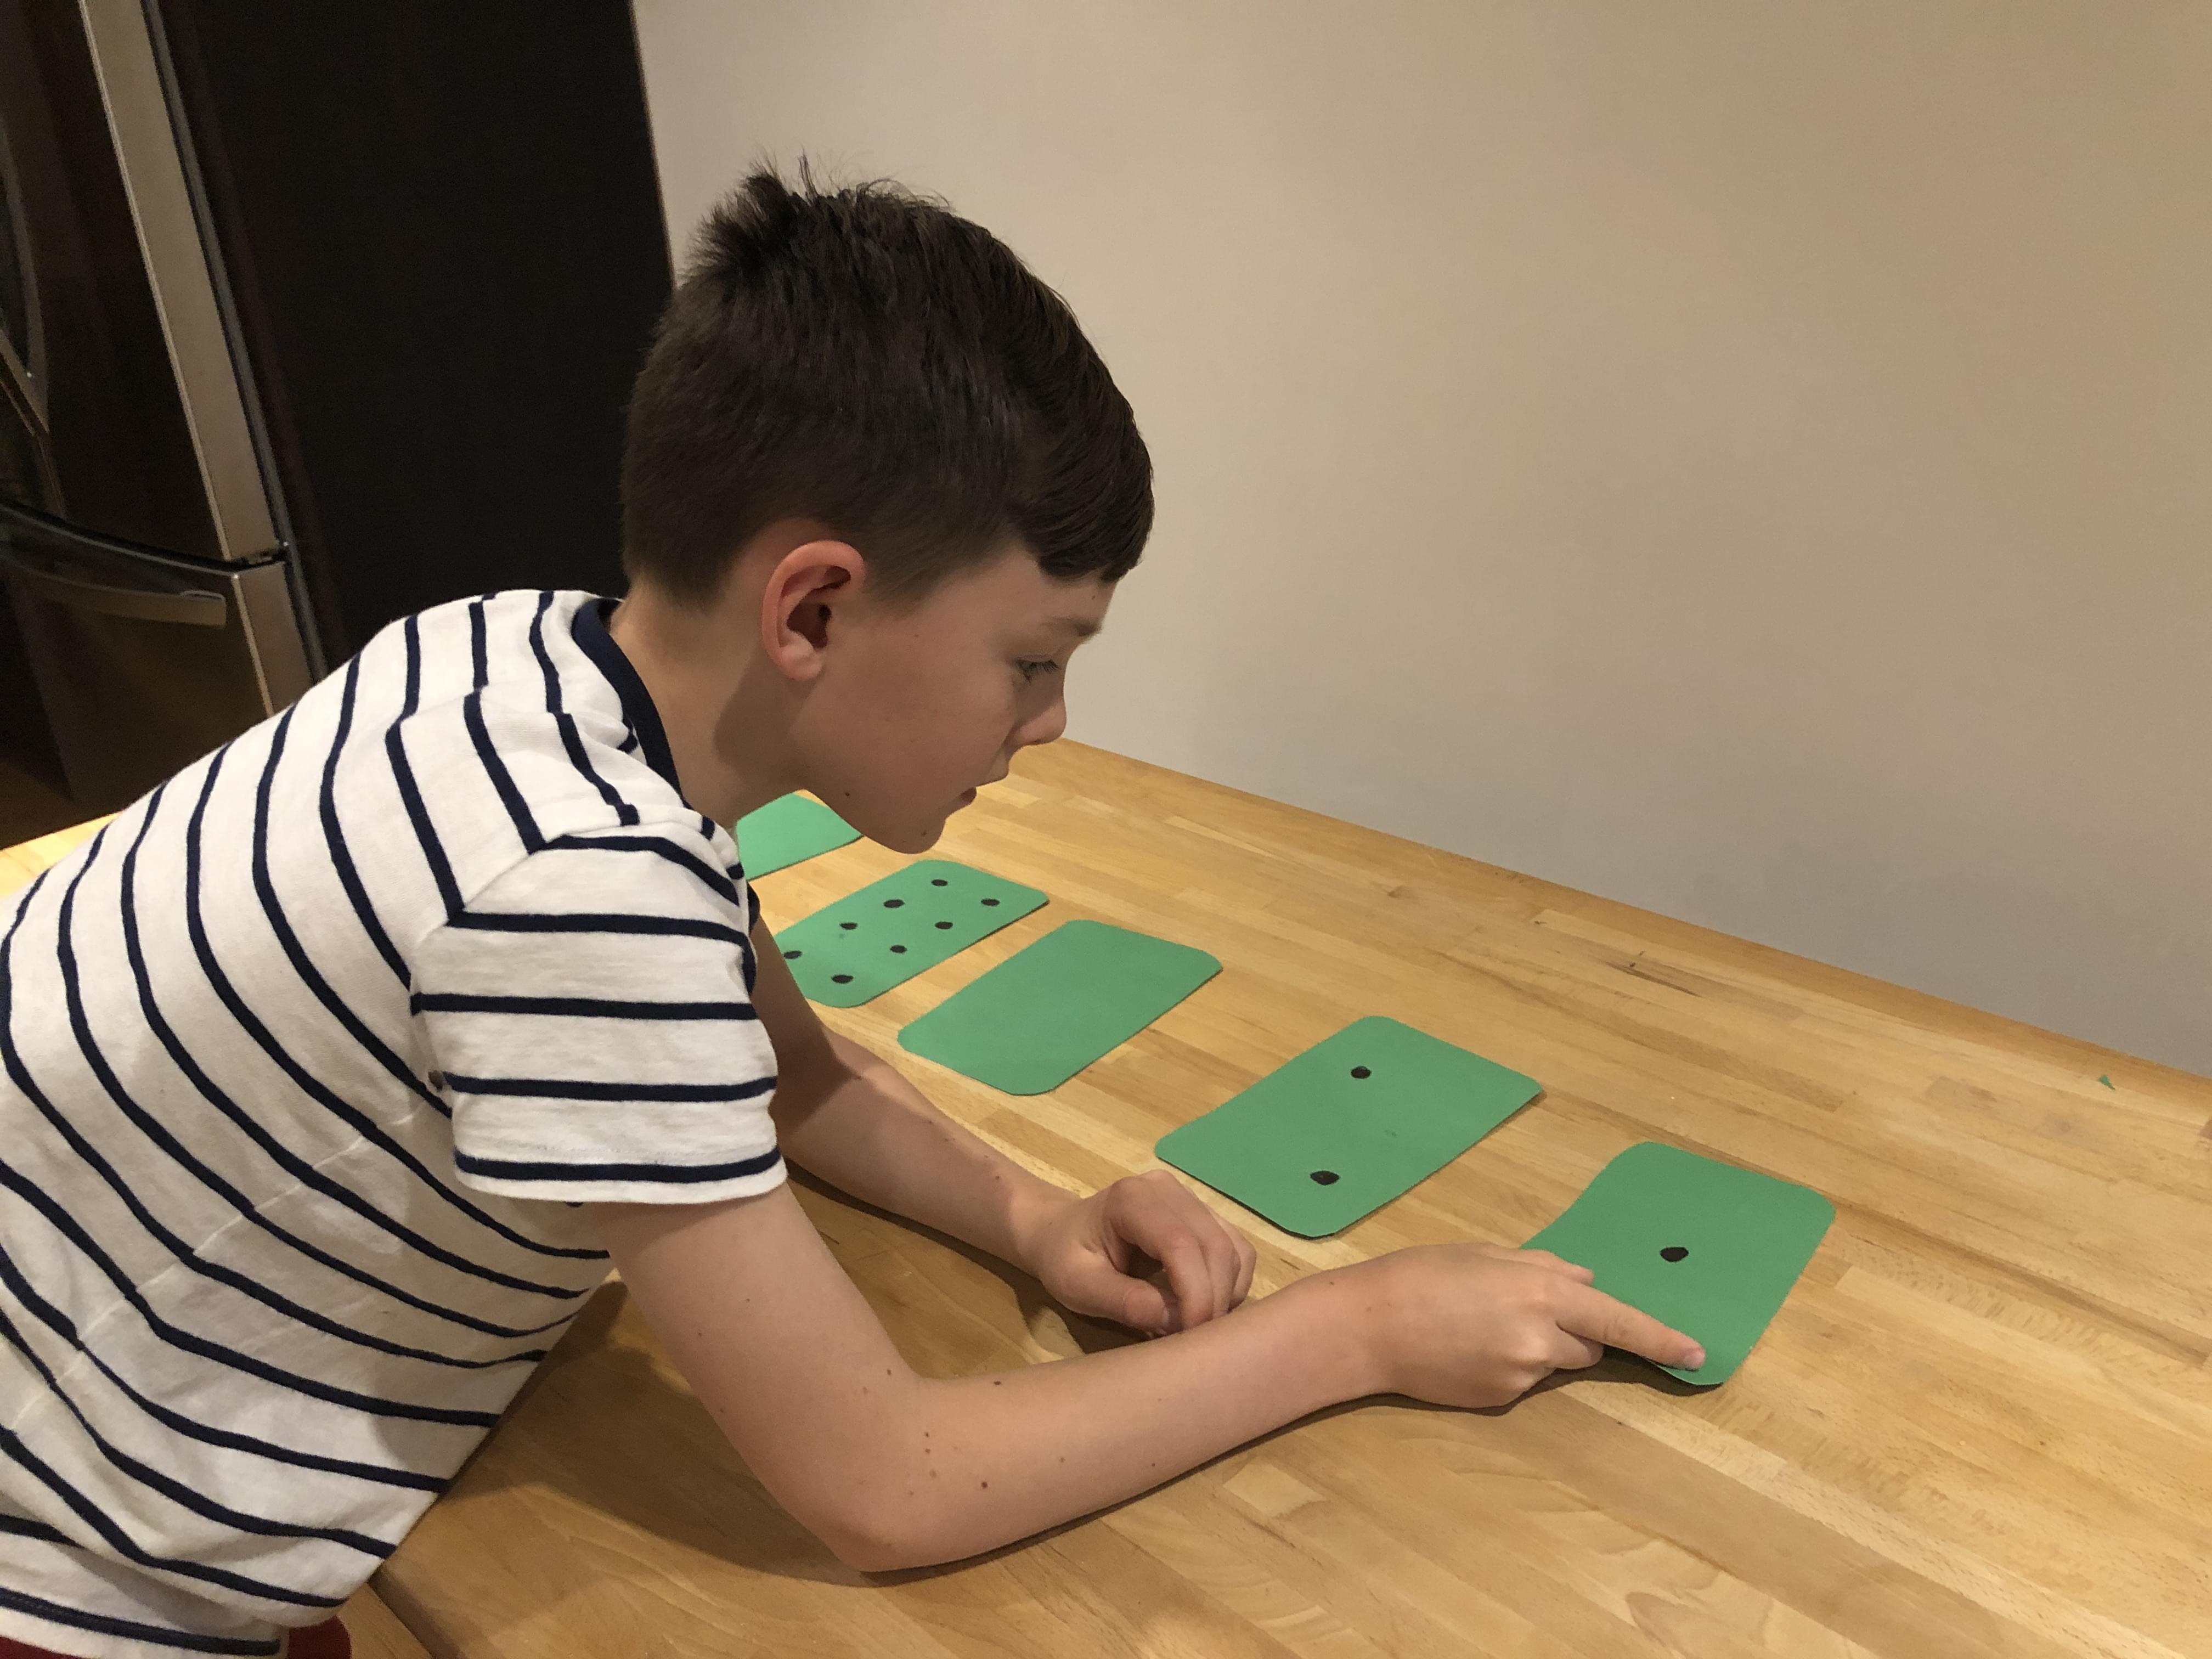 Child flipping the cards so that eleven dots are showing.